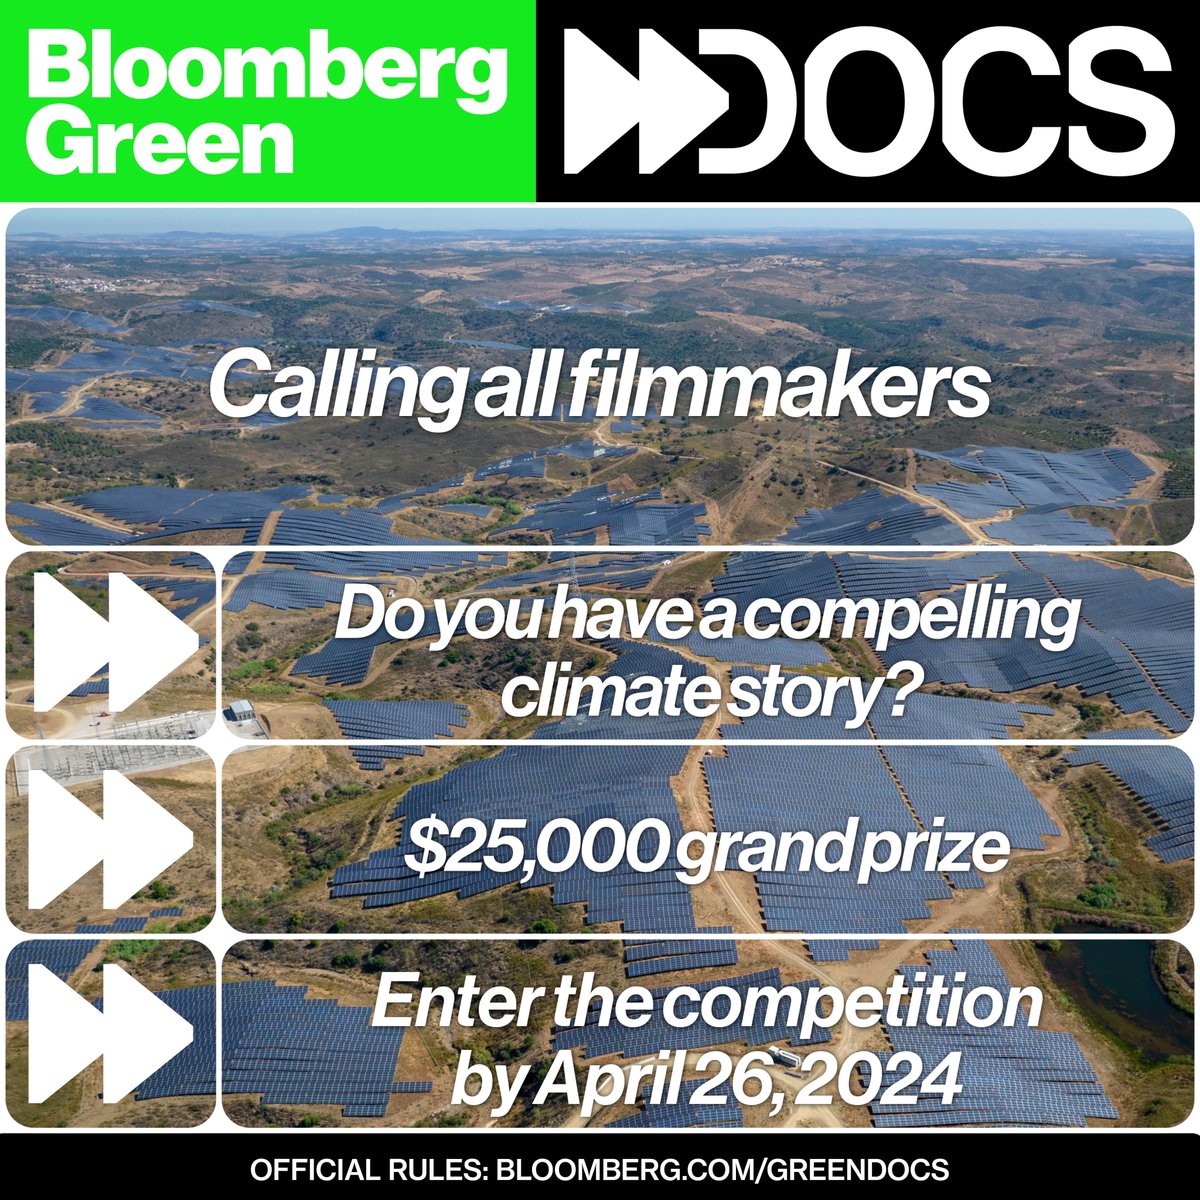 Attention documentary filmmakers! We want to see your view of our climate future. Submit your short film to our Bloomberg Green Docs competition by April 26, 2024. Grand prize: $25,000 Official Rules ➡️ bloom.bg/3qiOFPe Please share!